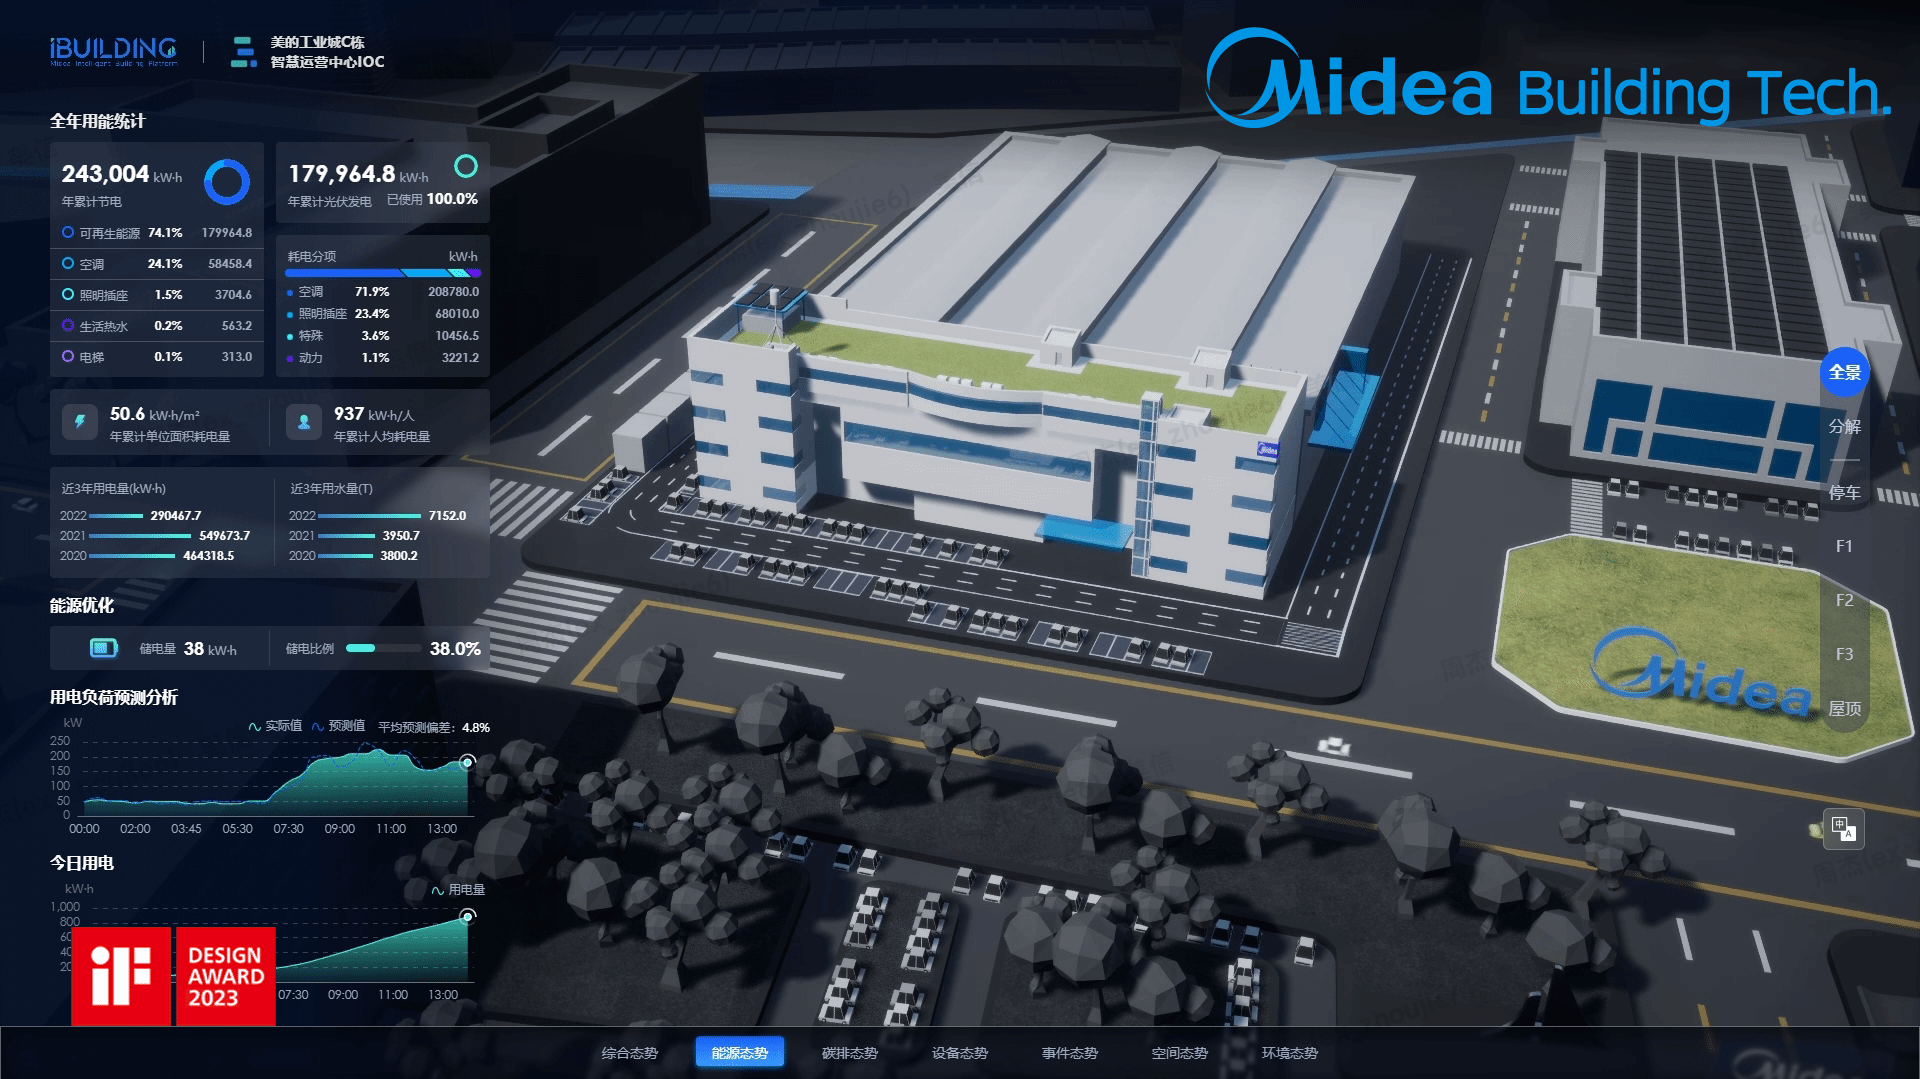 Six major products of Midea Building Technologies ranked on the